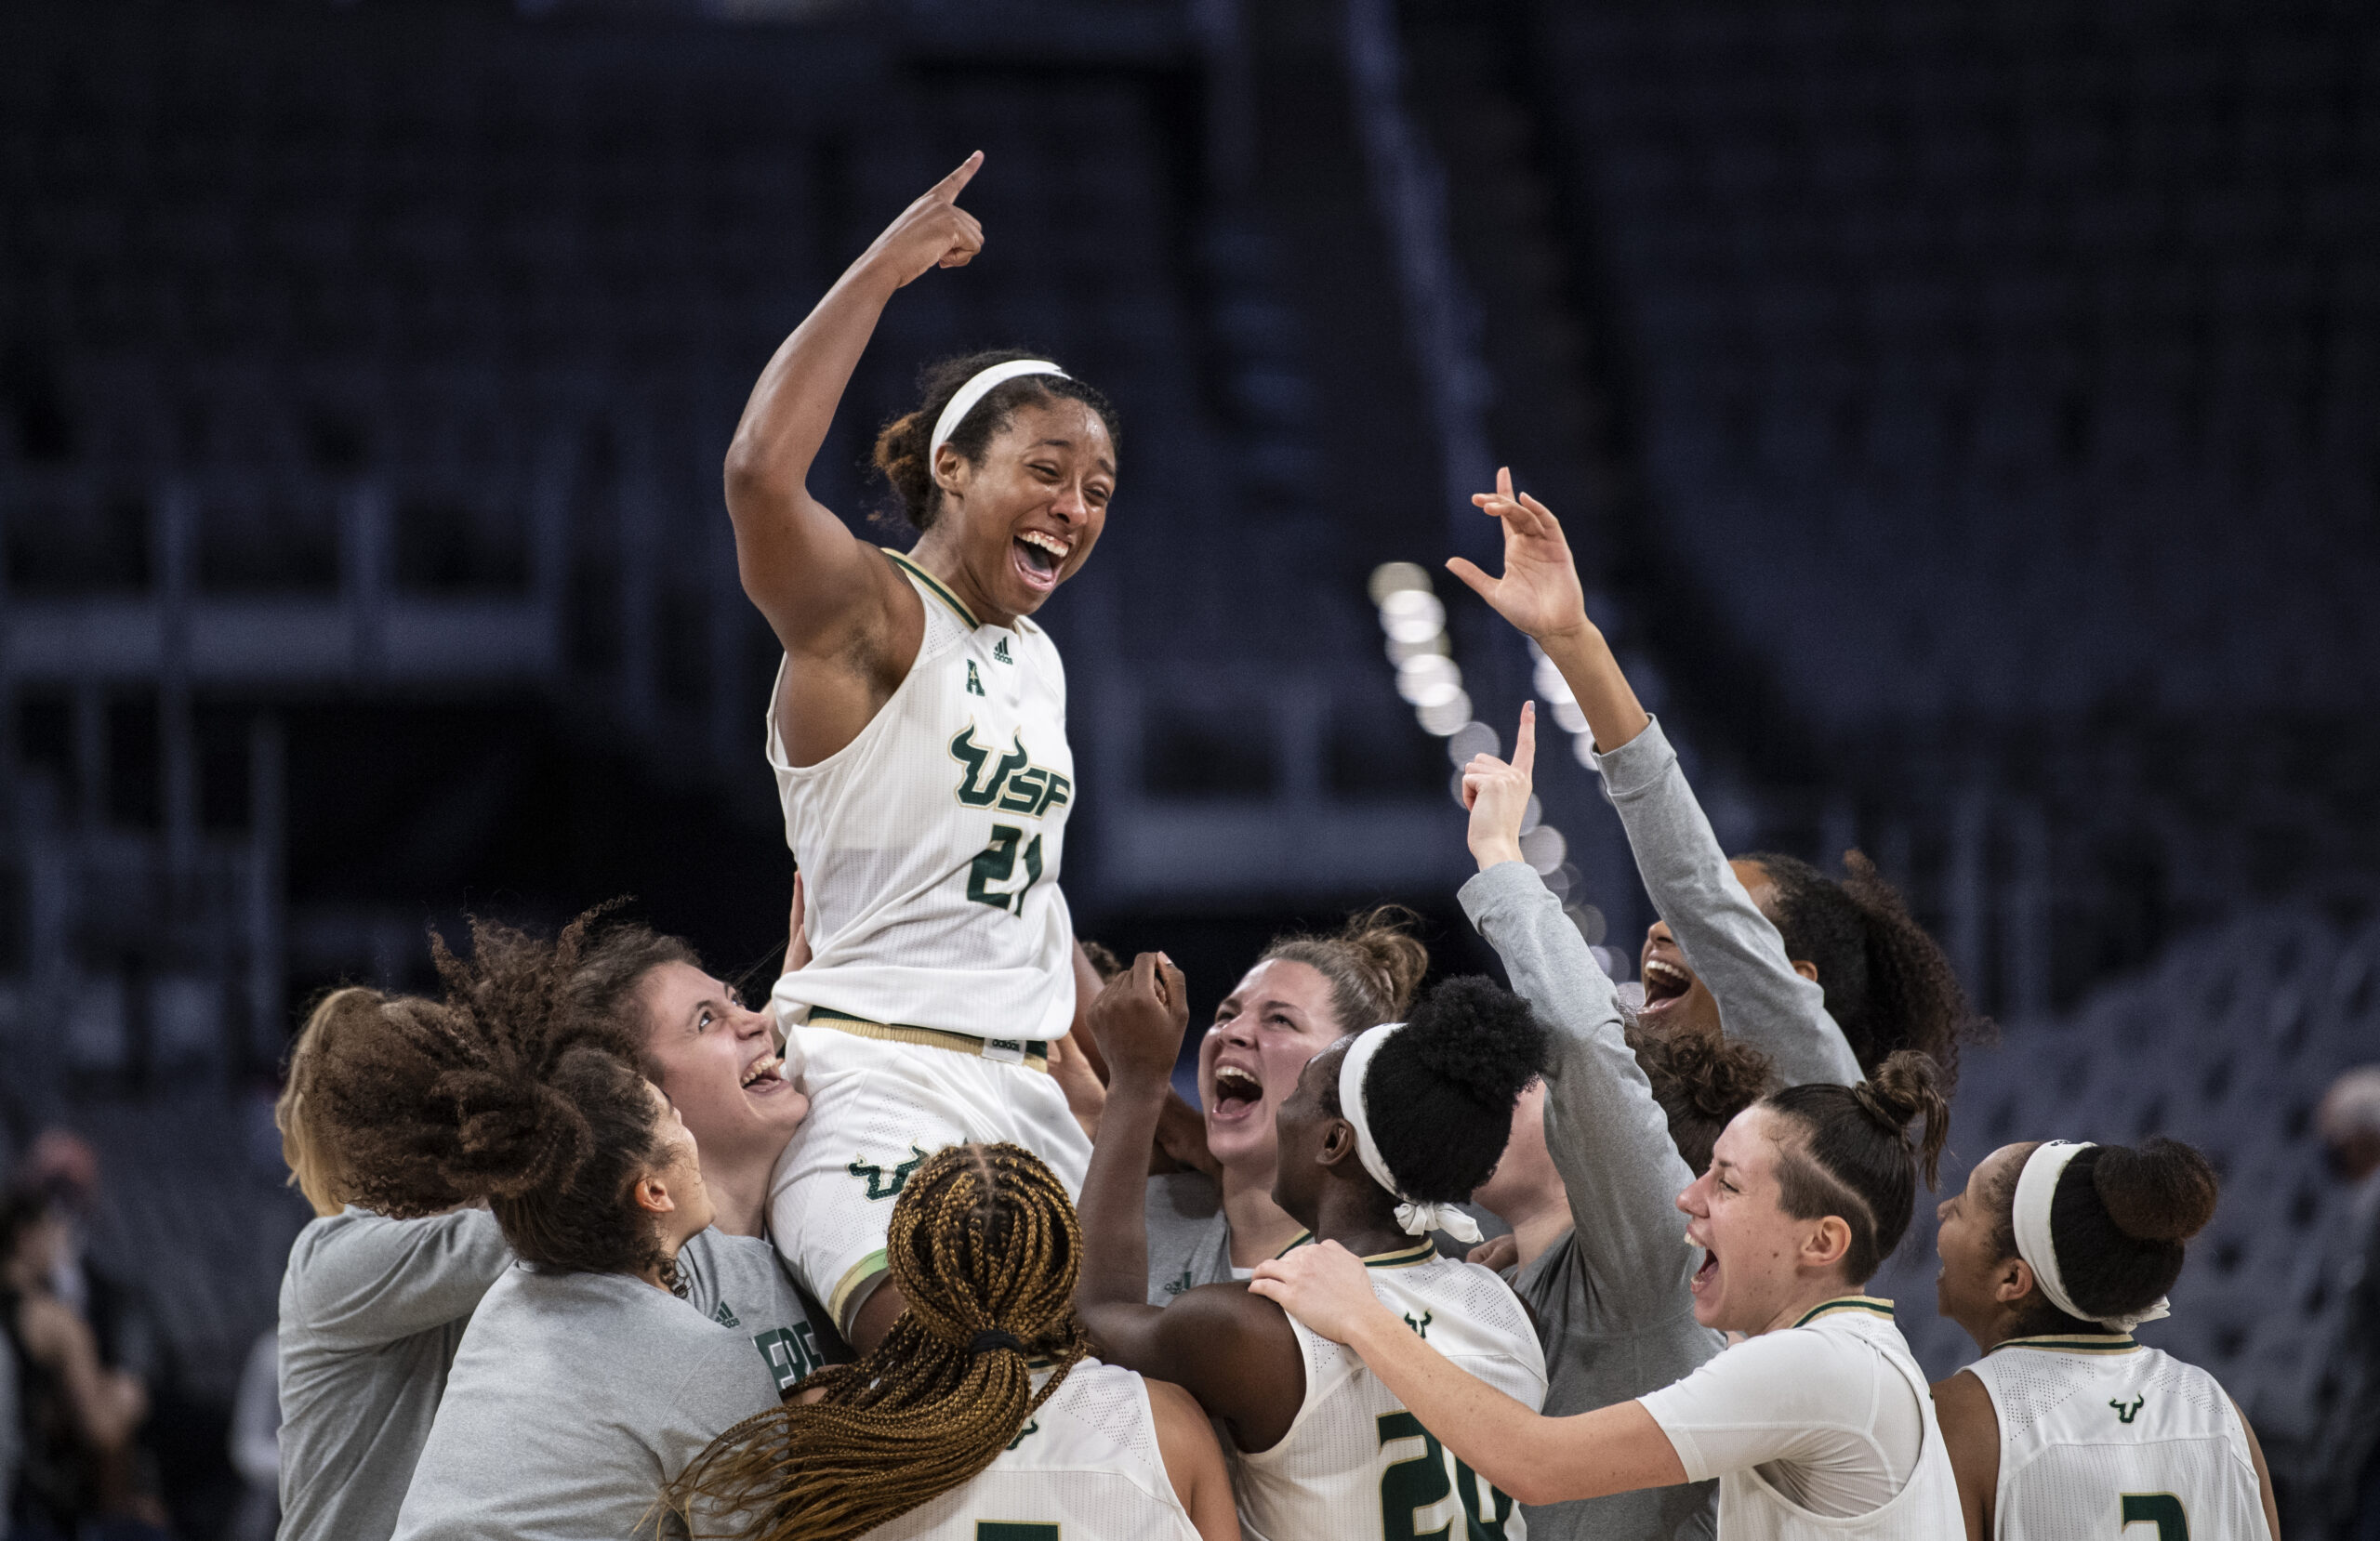 Shae Leverett #21 of the South Florida Bulls reacts after winning the American Athletic Conference Women's Basketball Championship game against the UCF Knights at Dickies Arena on March 11, 2021 in Fort Worth, Texas. (Photo by Benjamin Solomon/Getty Images)